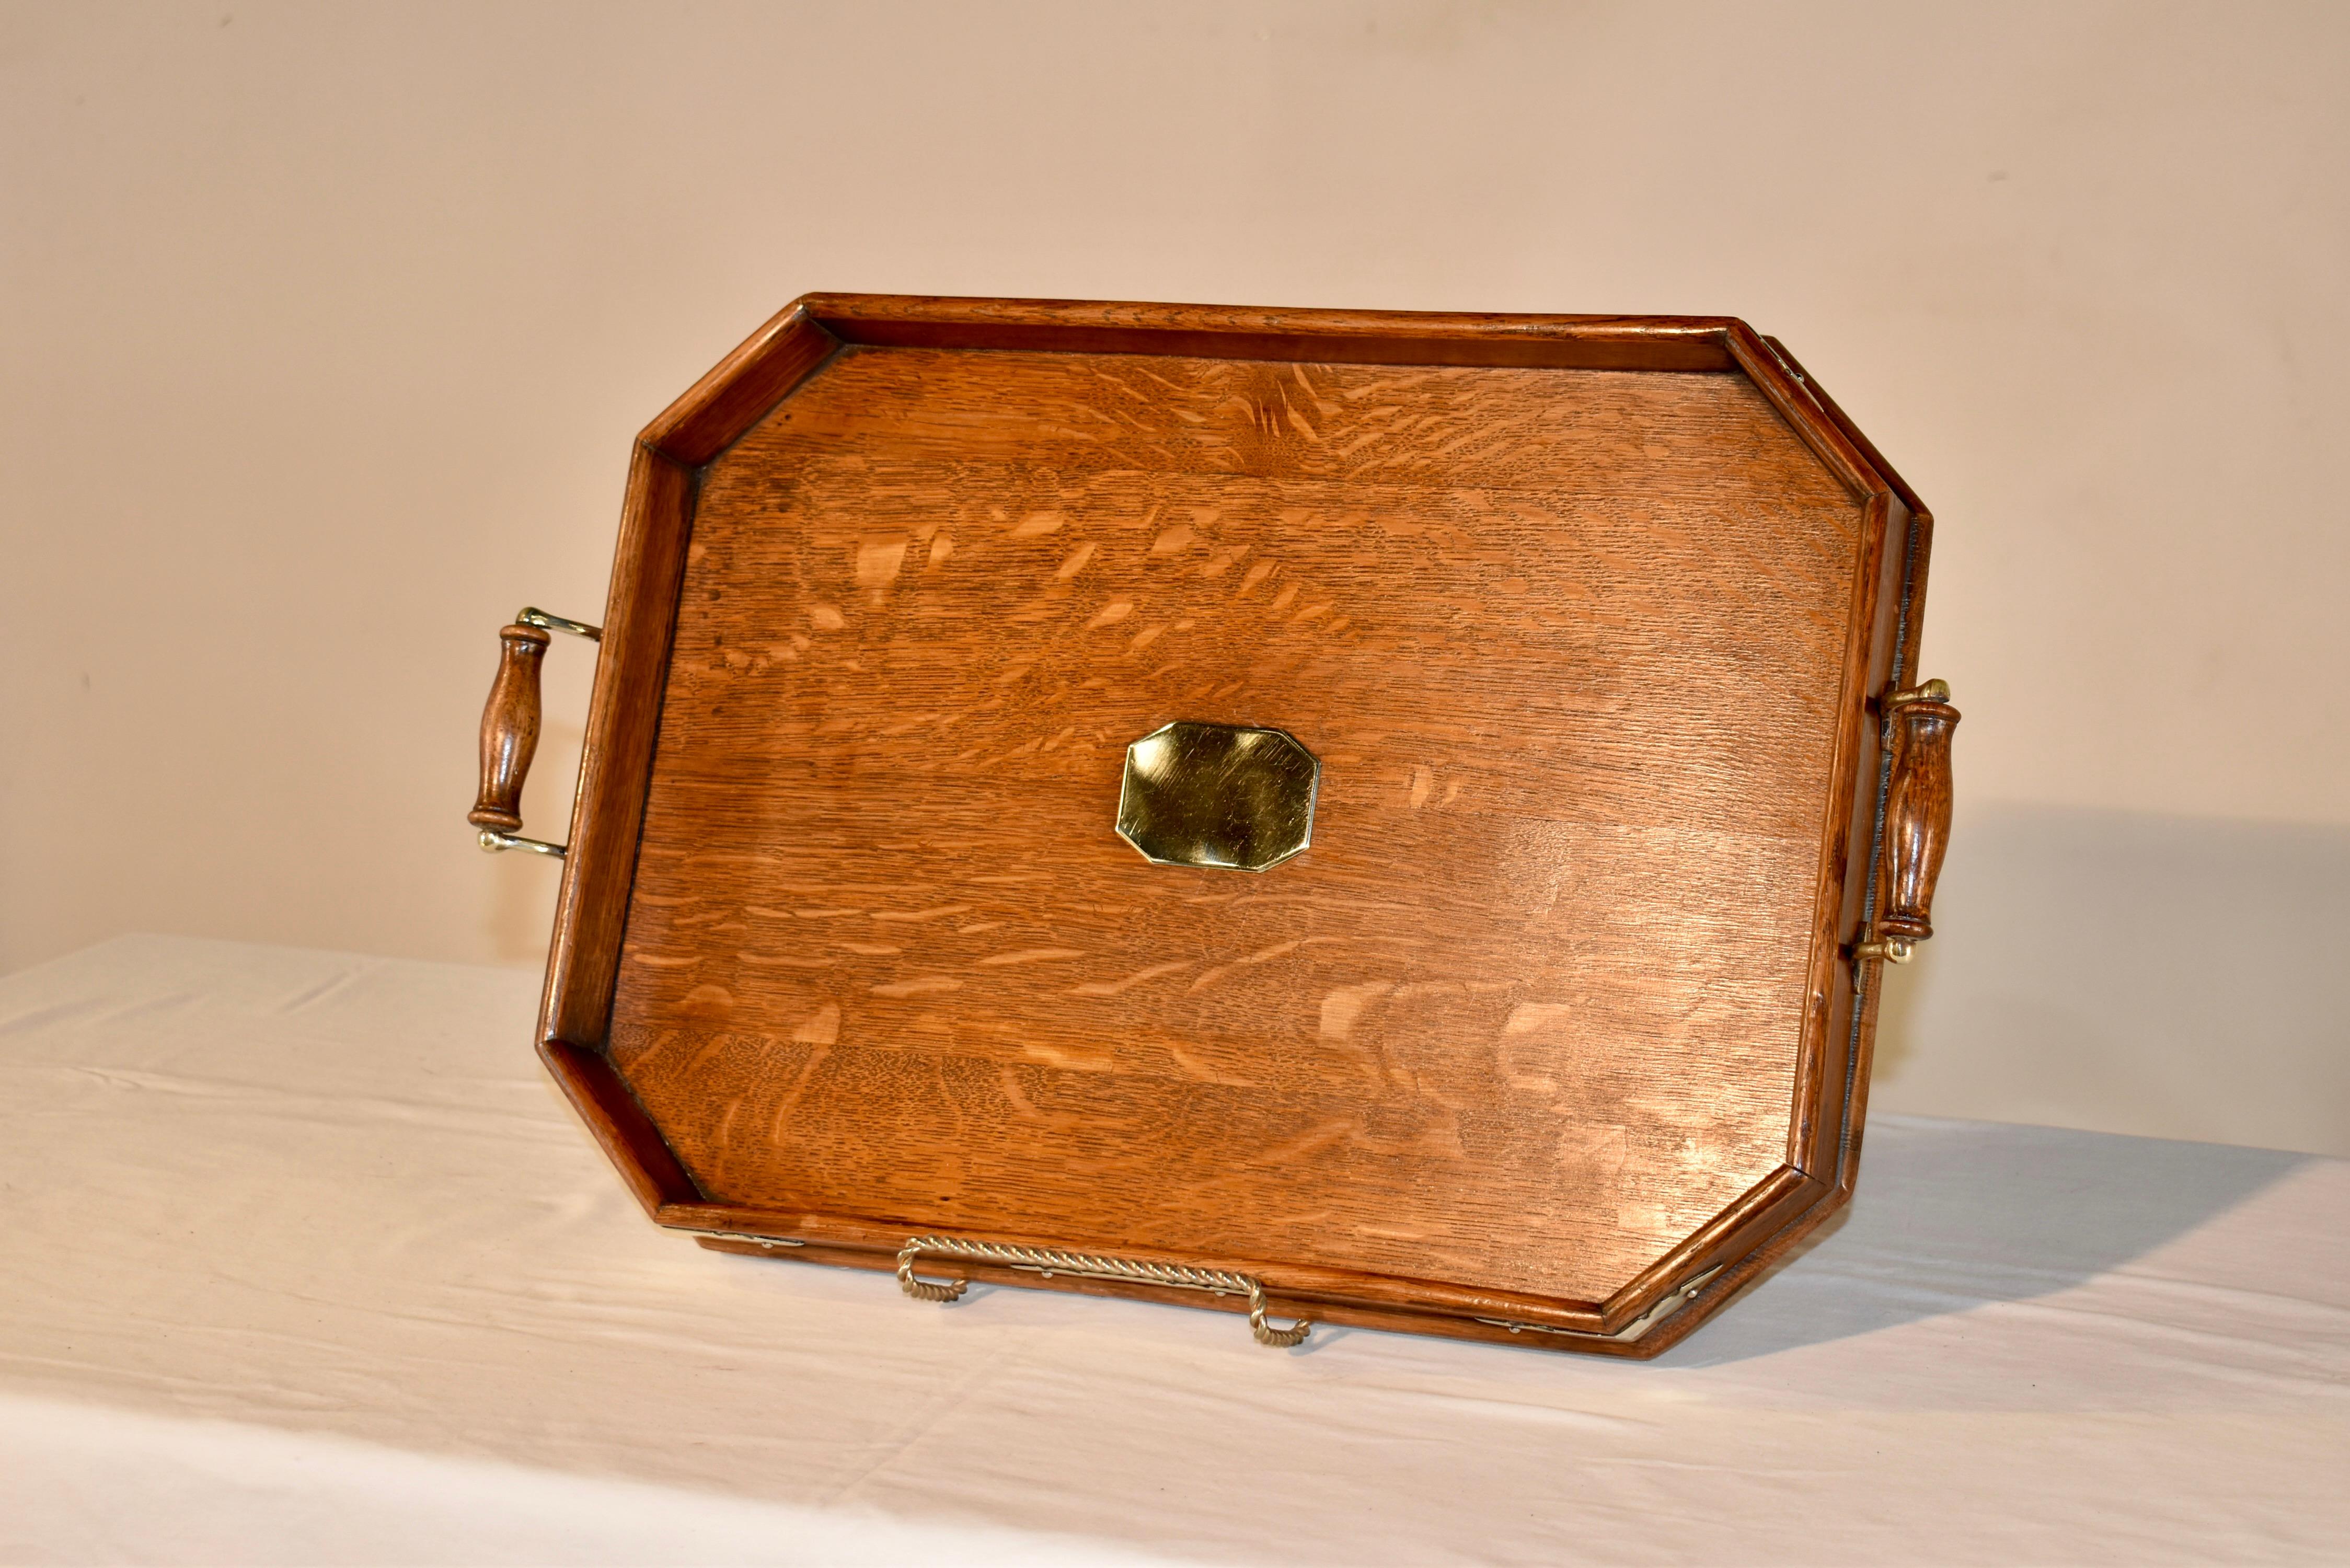 Late Victorian Late 19th Century English Serving Tray For Sale